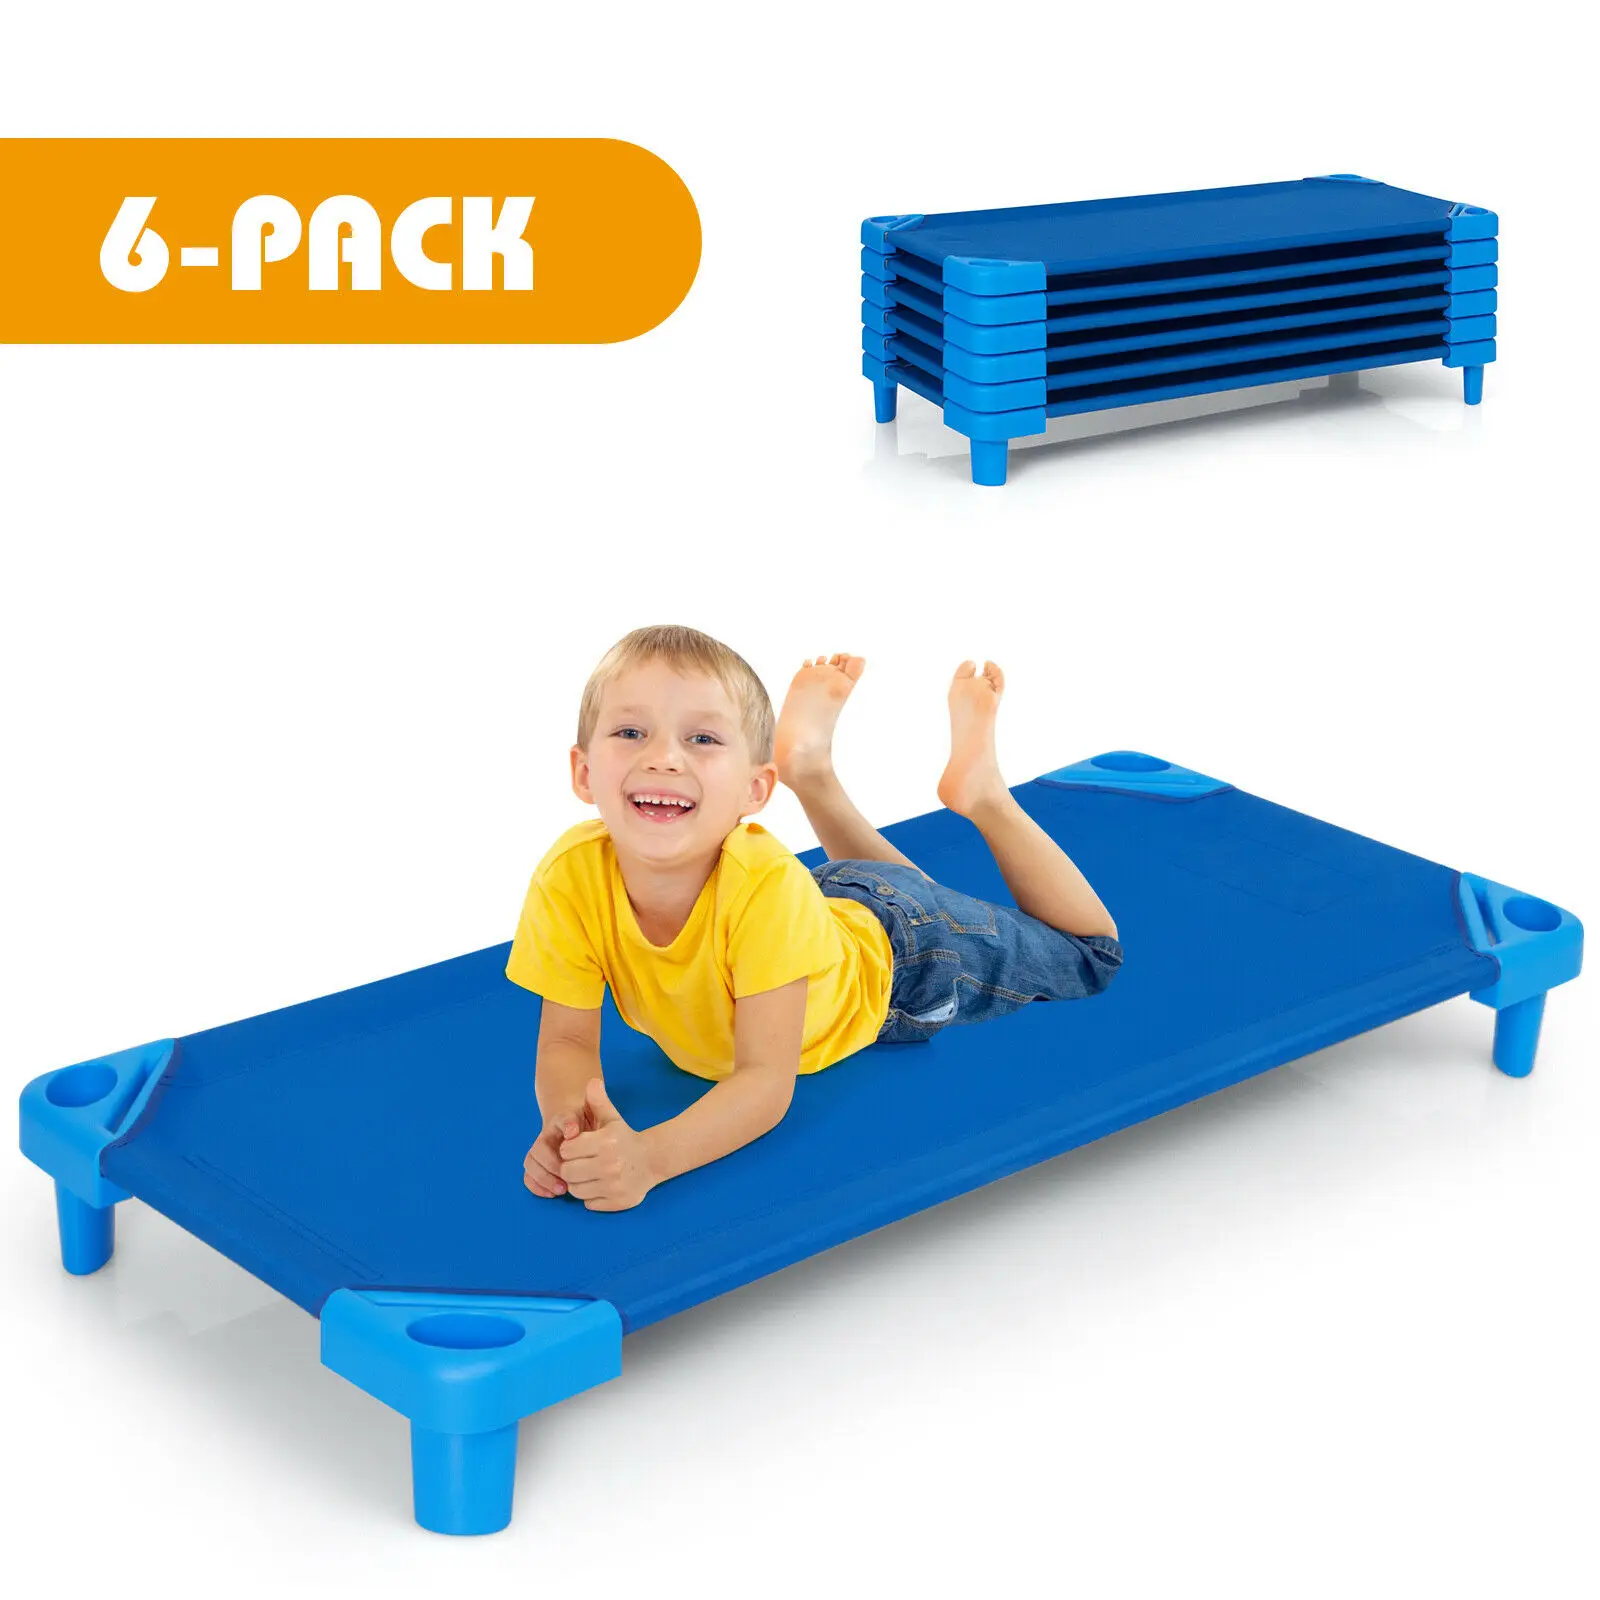 Pack of 6 Kids Stackable Naptime Cot 52'' L x 23'' W Daycare Rest Mat